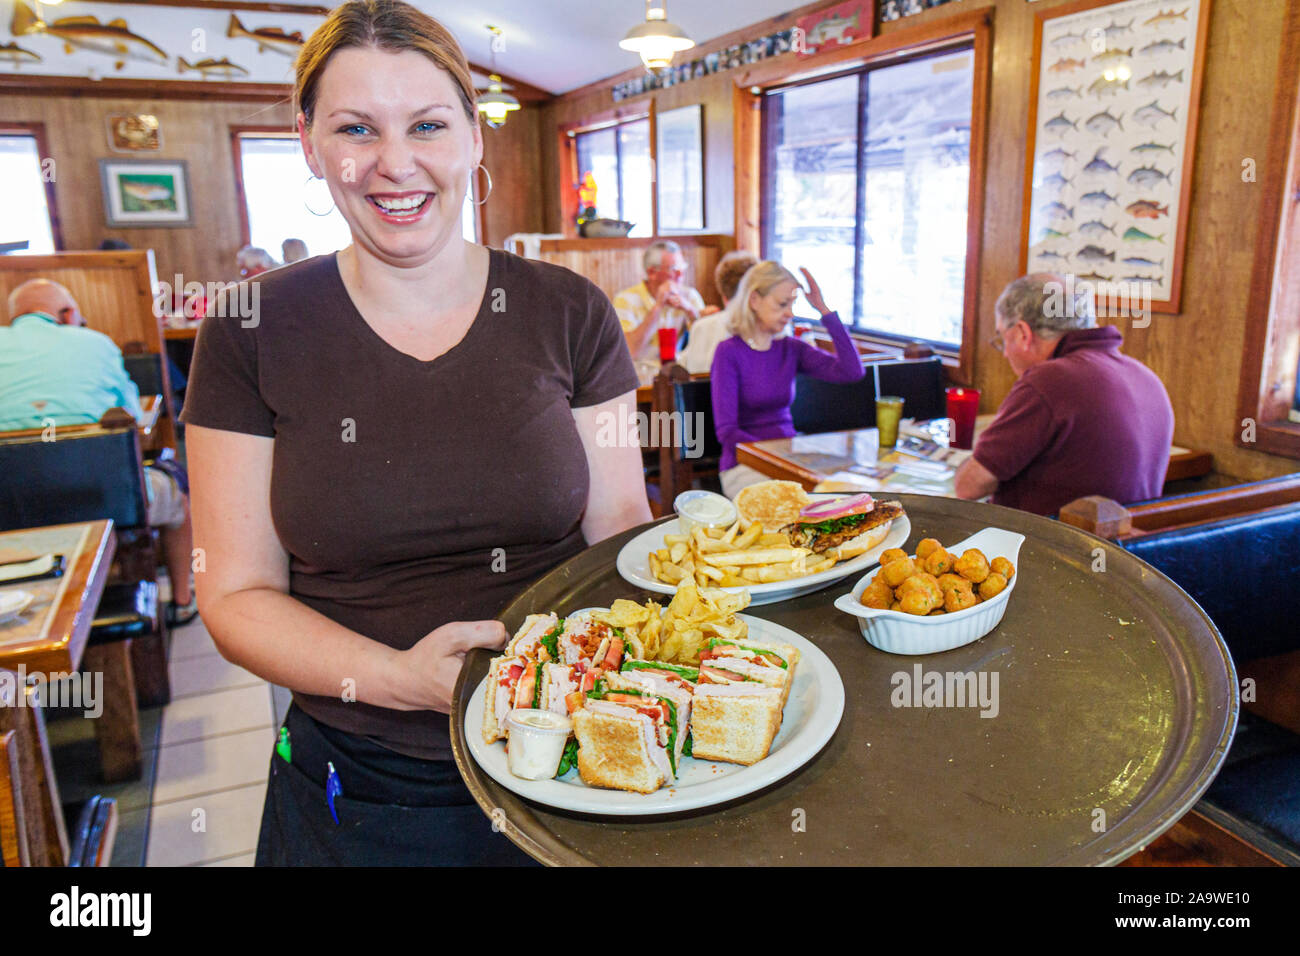 Florida The Everglades,Everglades City,waitress server employee worker workers working staff,serving food,tray,service,FL100322024 Stock Photo